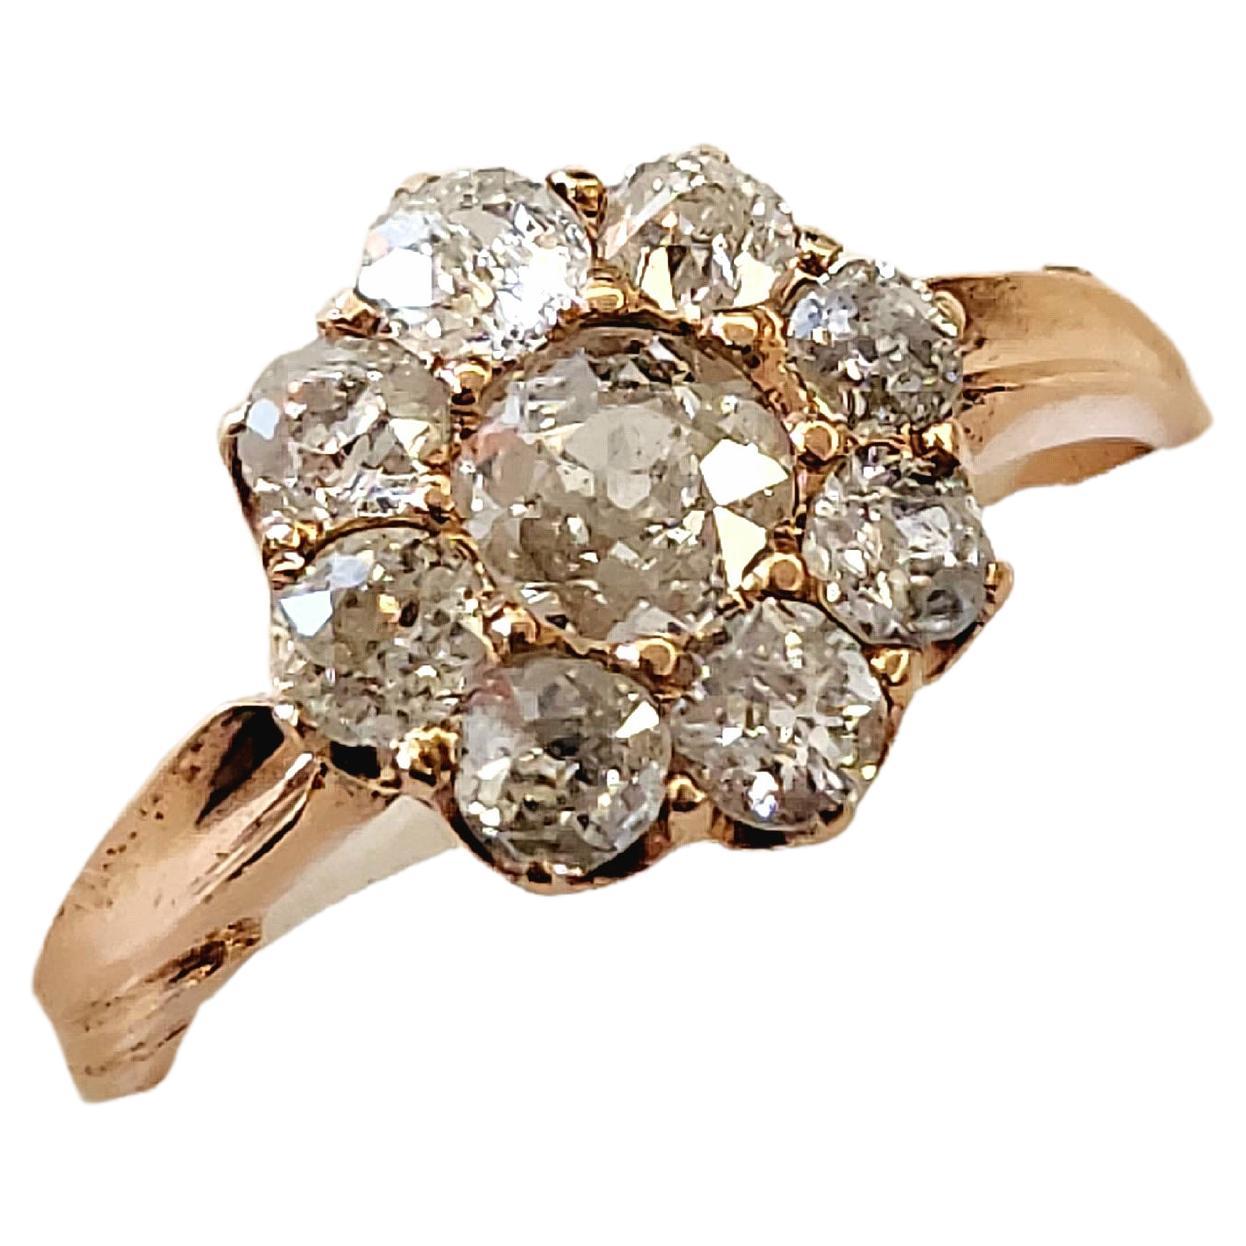 Antique 14k gold old mine cut diamond ring in floral head designe with estimate diamond weight of 1.4 carats H colour vs clearity centered with large old mine cut diamond flanked with smaller diamonds in detailed work on ring setting and total gold